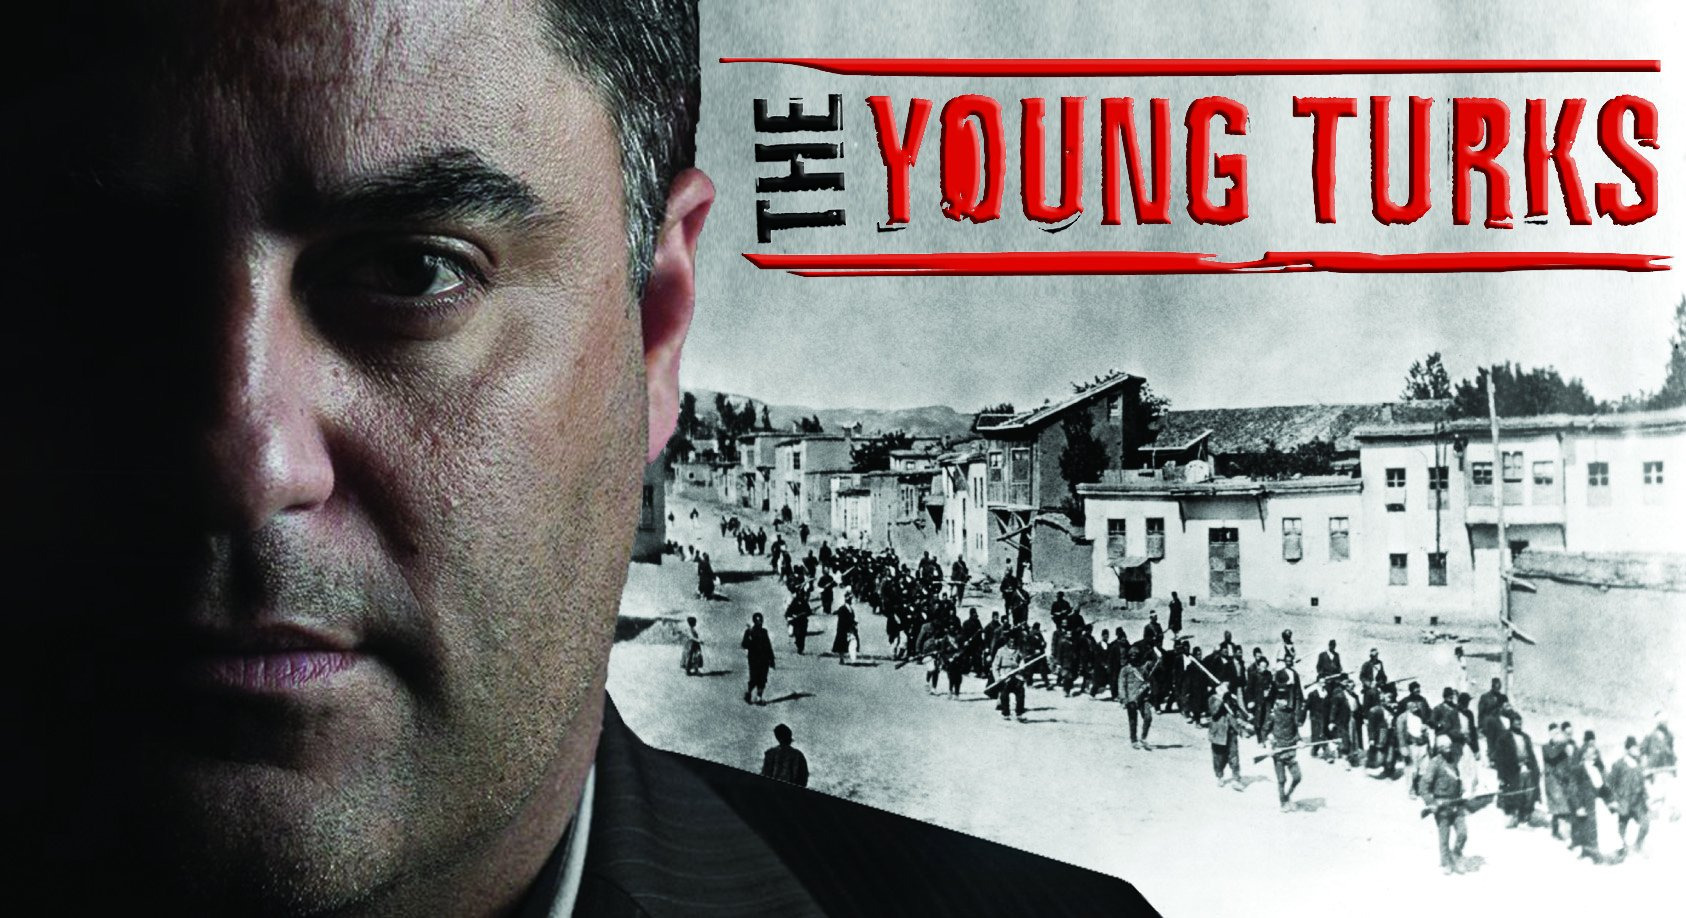 Show The Young Turks